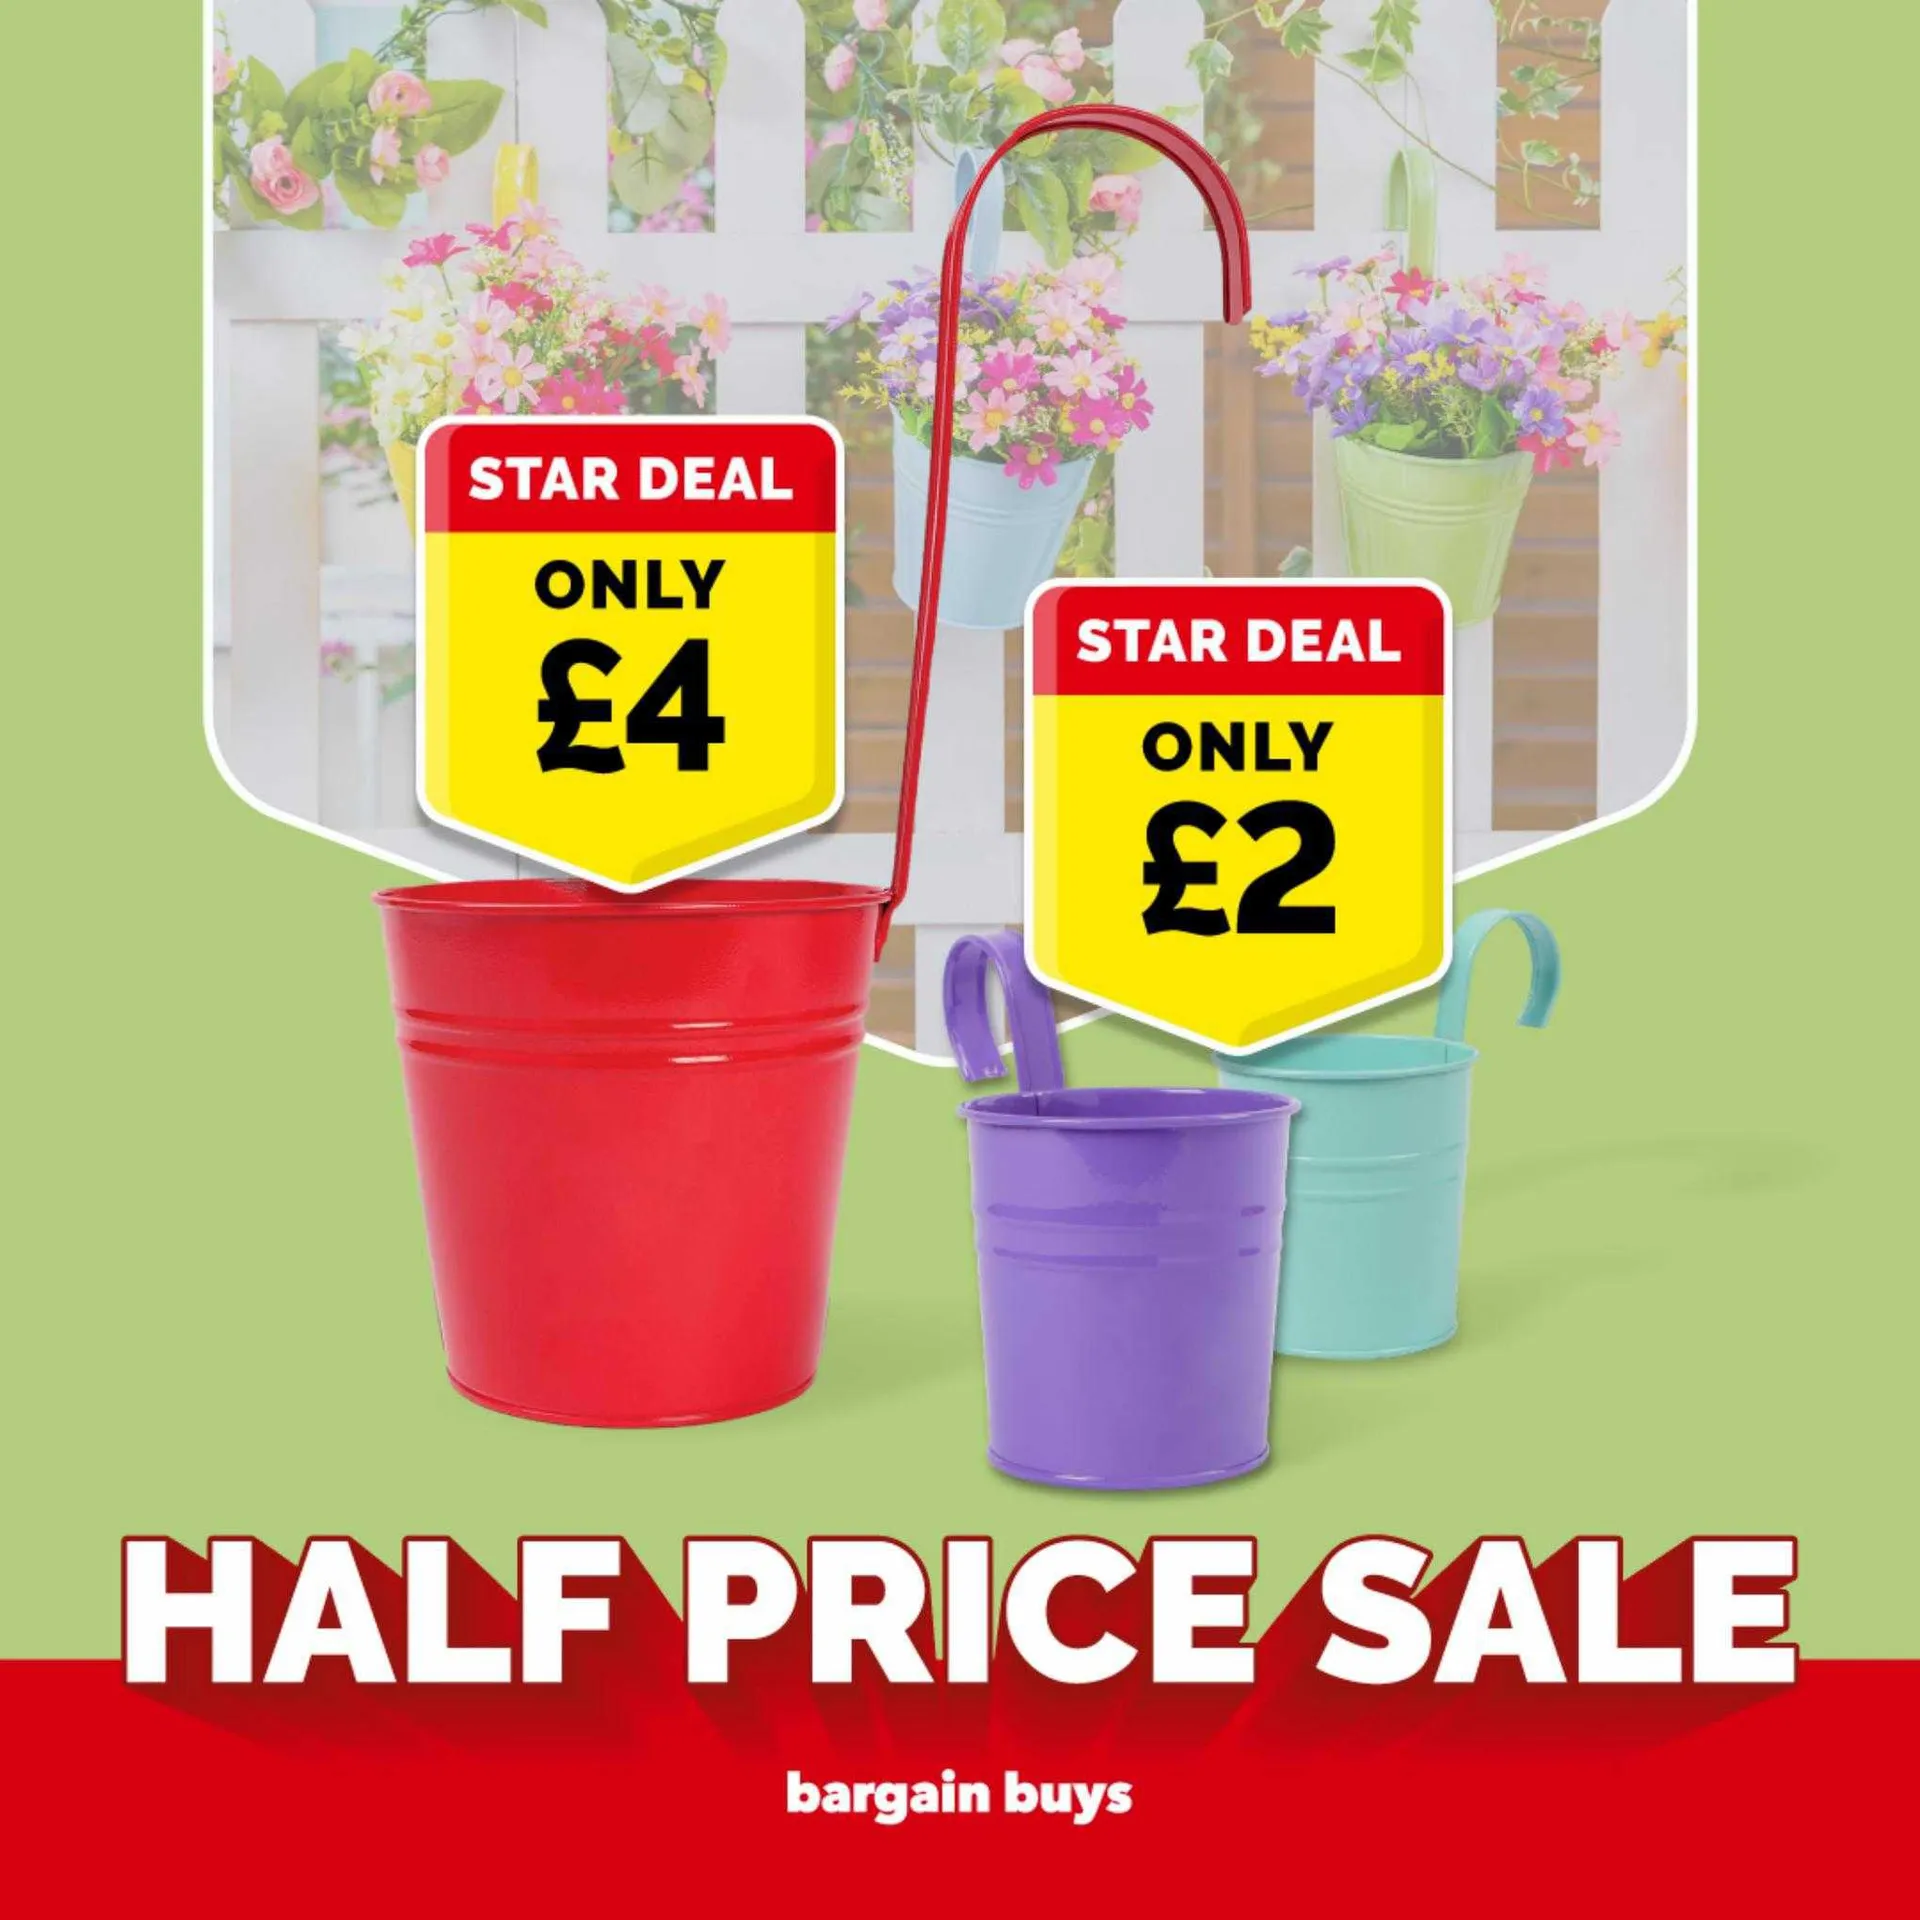 Poundstretcher Weekly Offers - 3